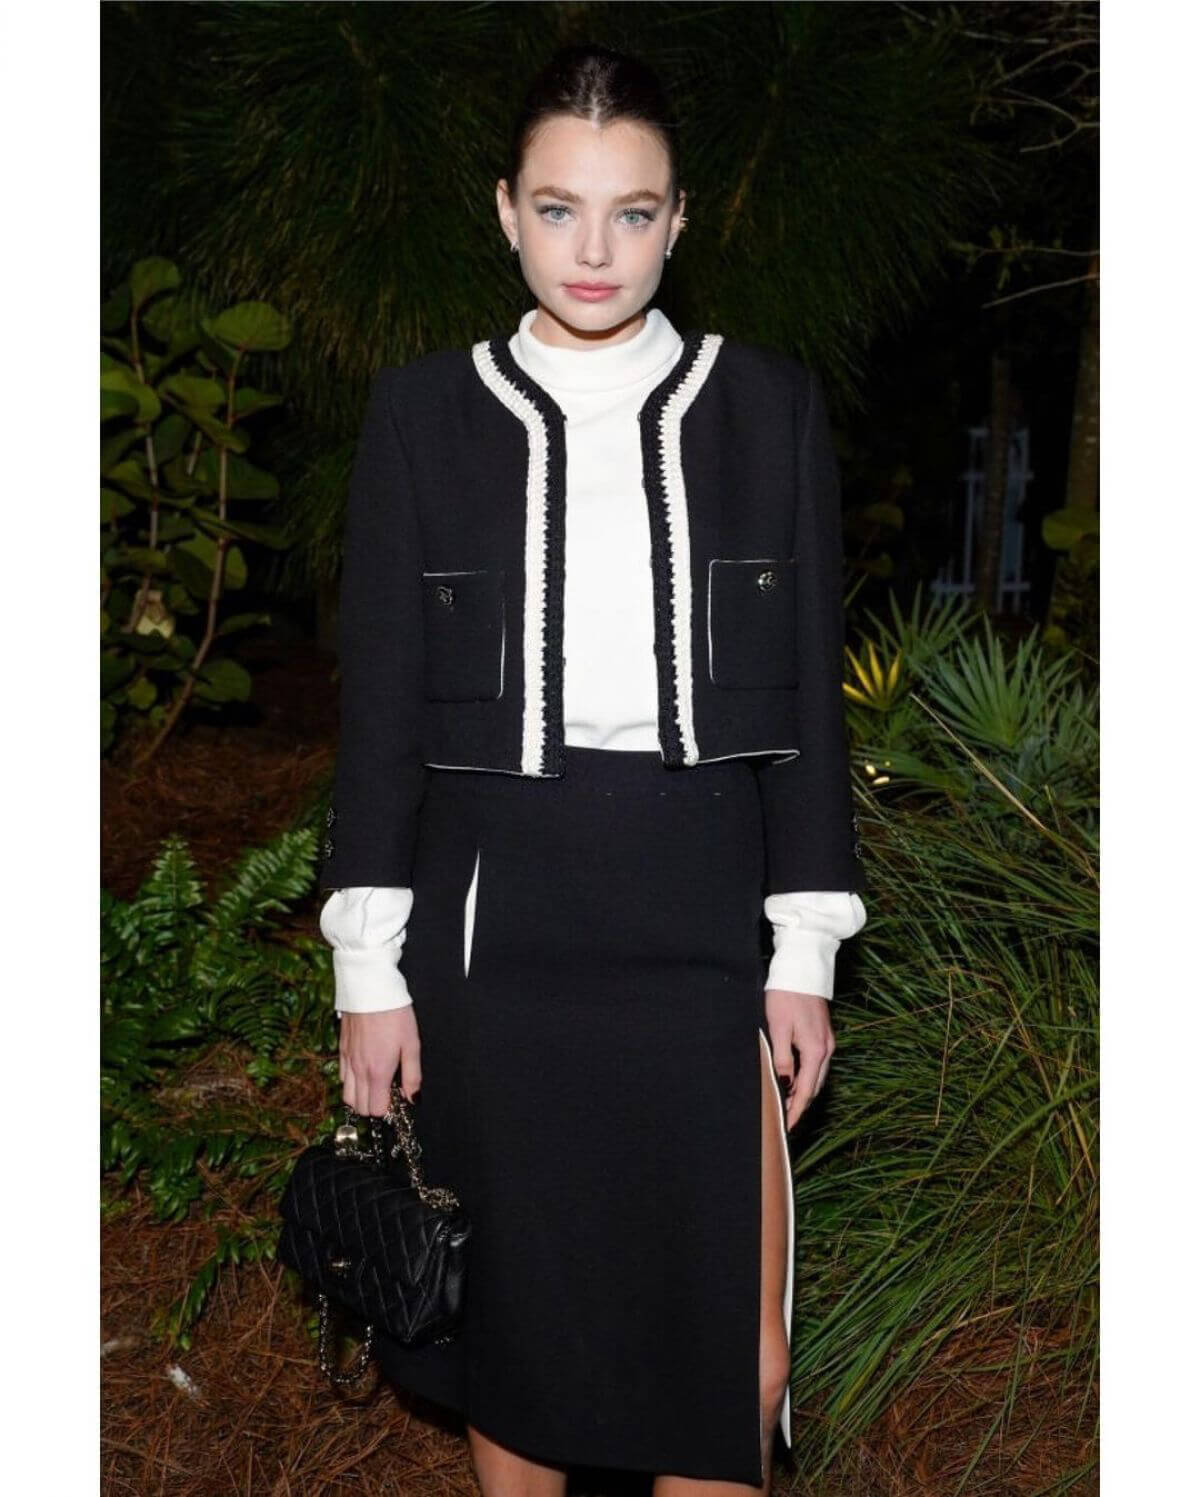 Kristine Froseth in Black and White Outfit at Chanel Dinner to Celebrate Five Echoes in Miami 2